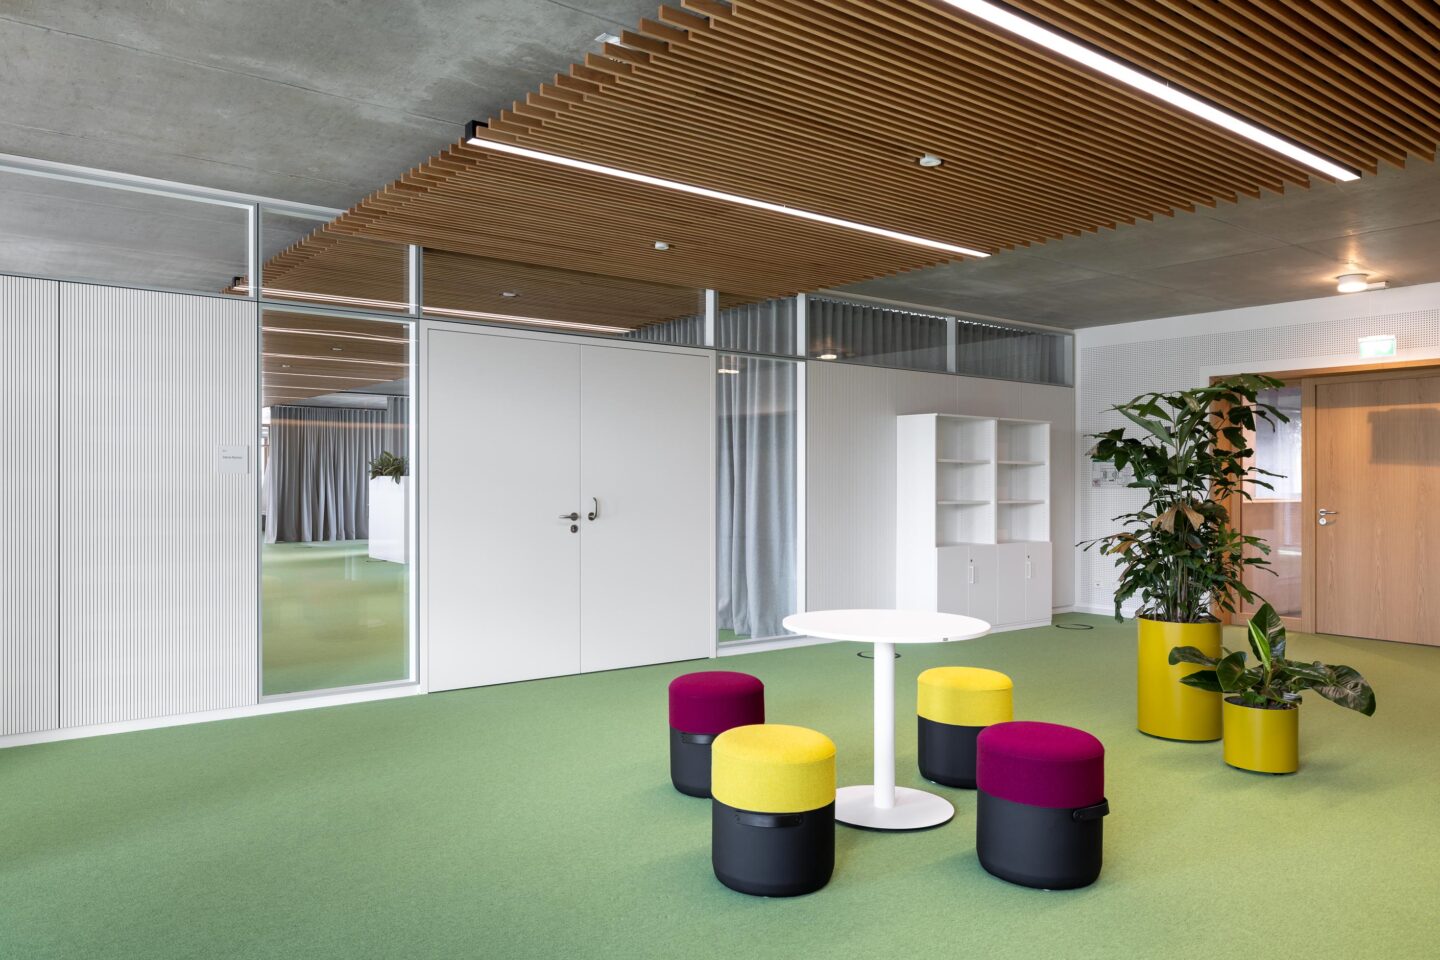 Sparkasse Markgräflerland | sitting area inside an office with system walls by feco